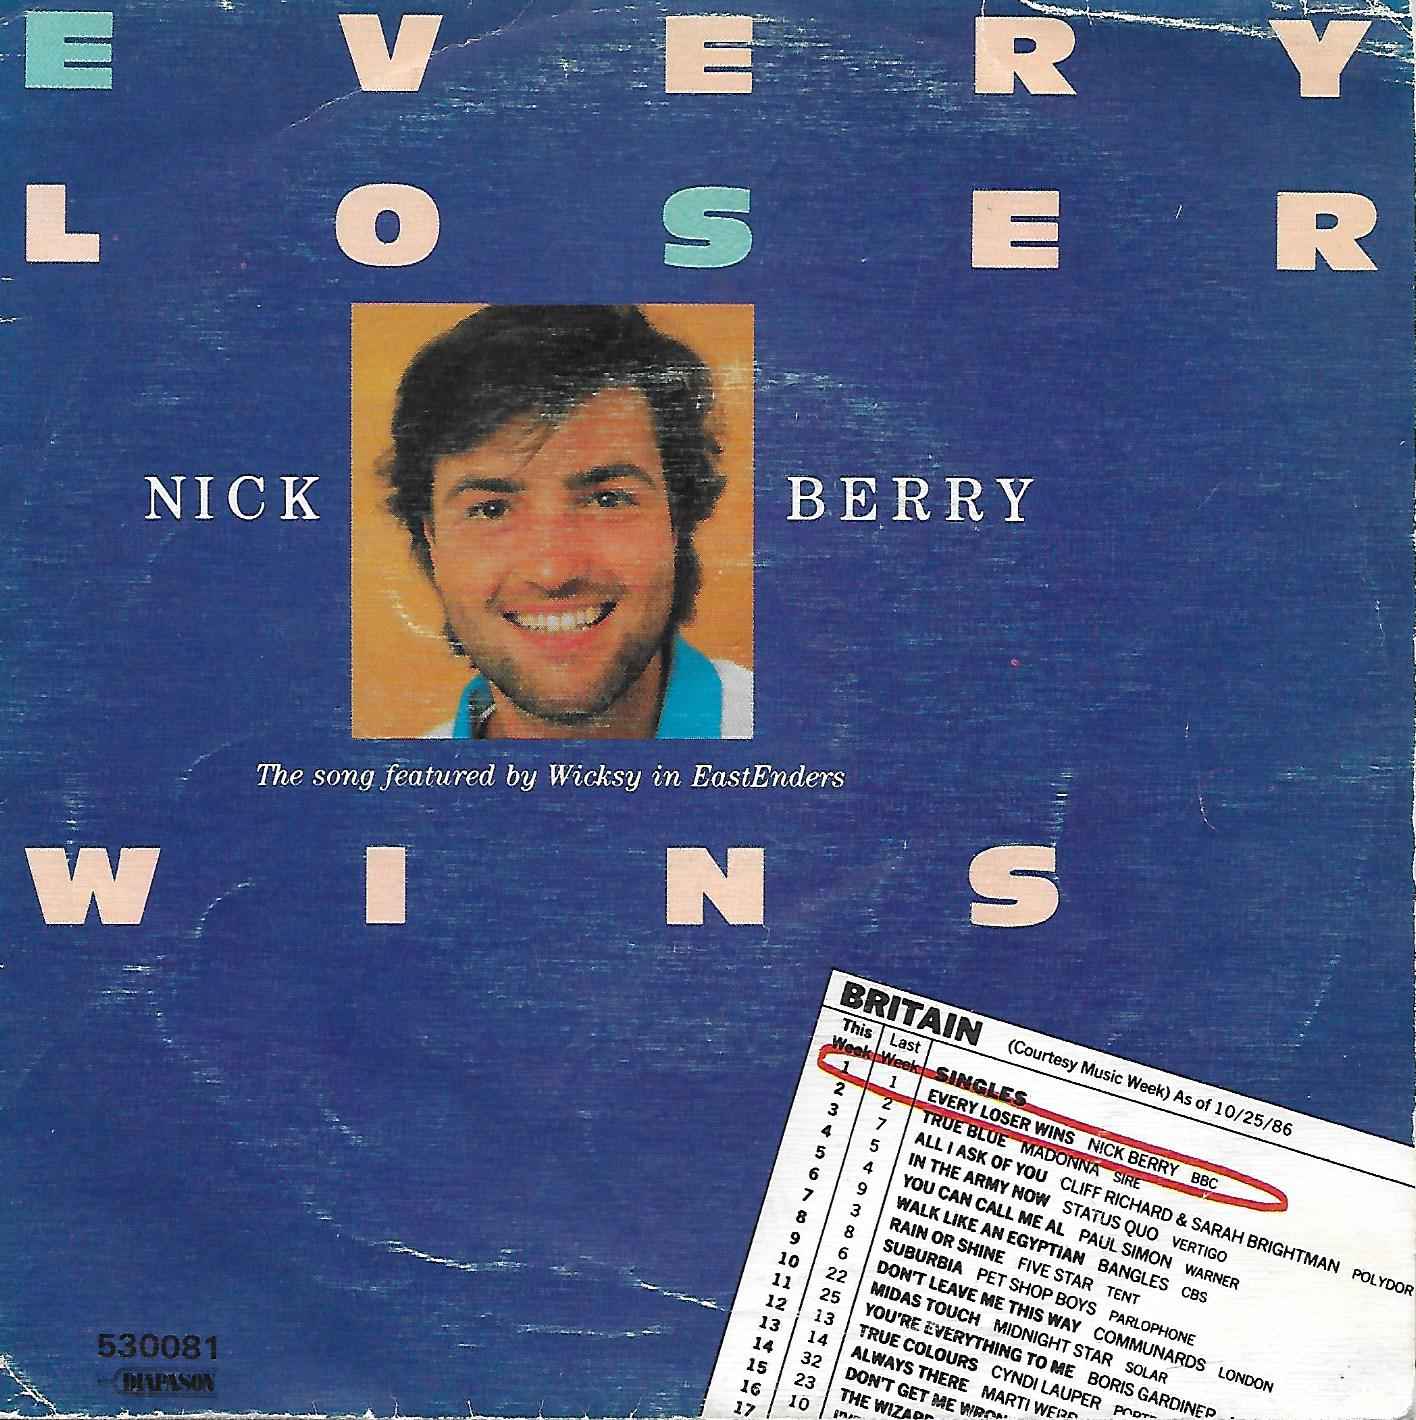 Picture of 53.0081 Every loser wins (Spanish import) by artist Nick Berry from the BBC singles - Records and Tapes library